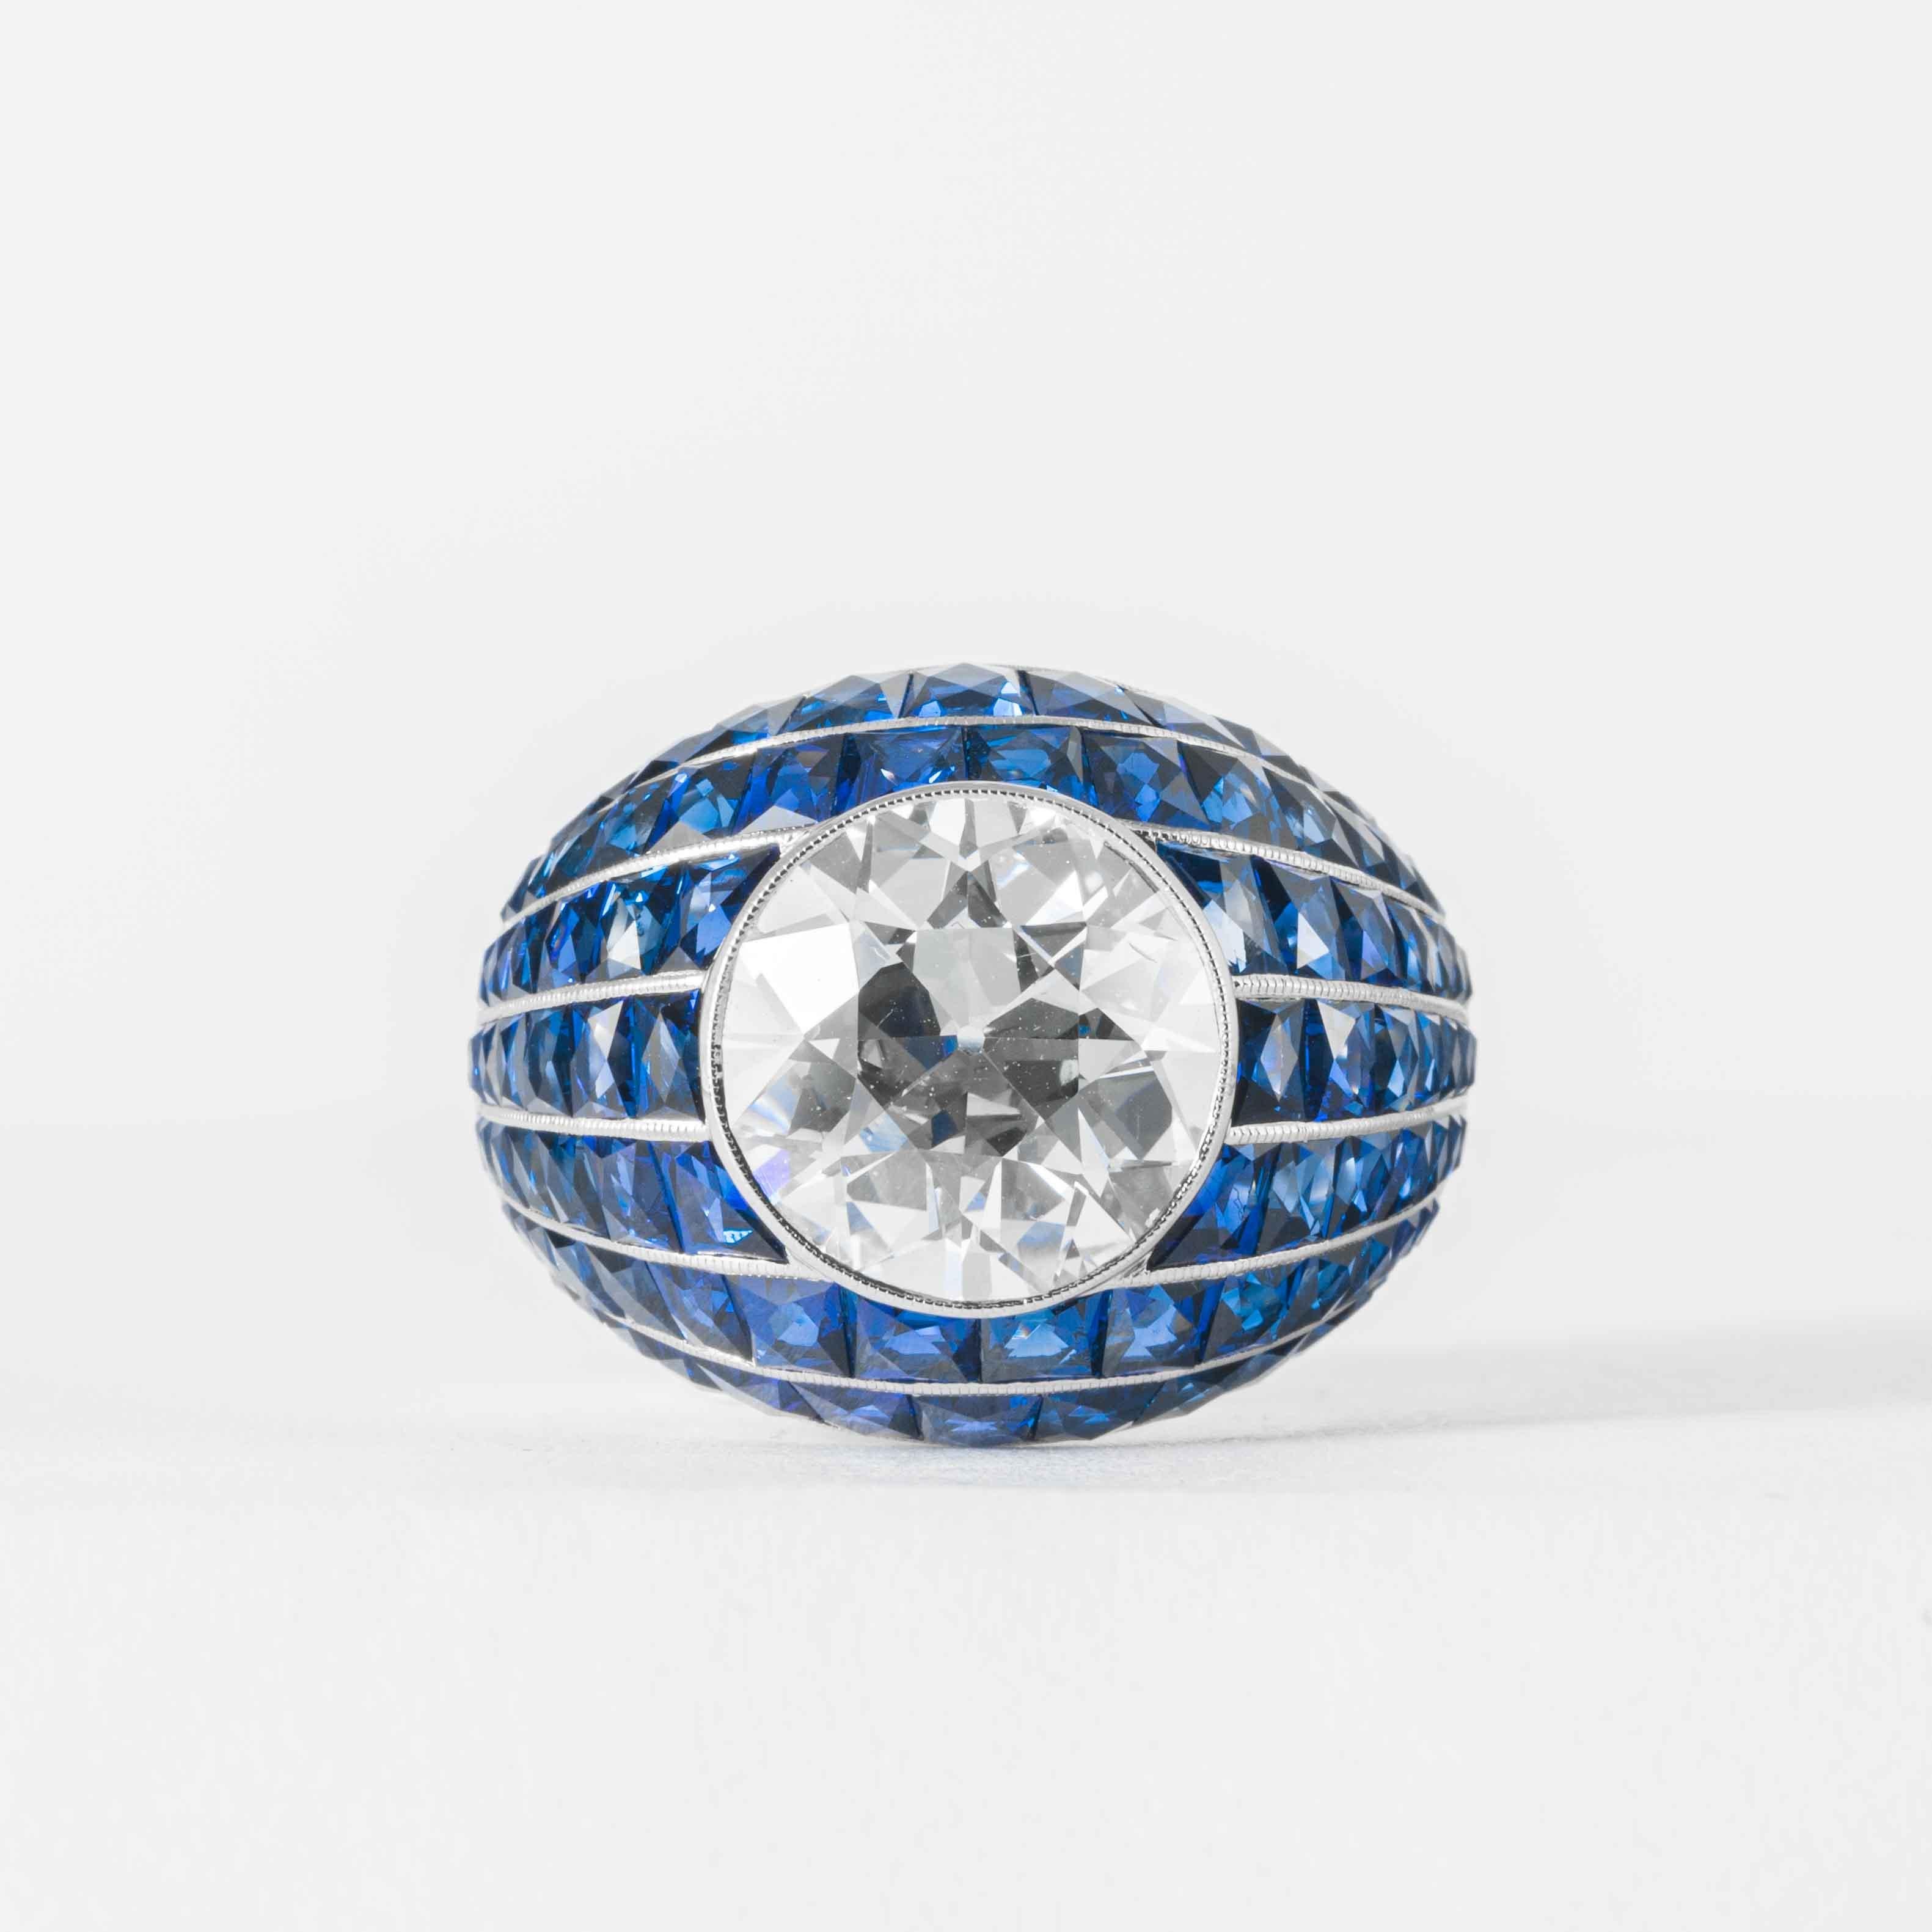 This elegant and classic diamond ring is offered by Shreve, Crump & Low. This 5.03 carat GIA certified J VS2 old European cut diamond is custom set in a handcrafted Shreve, Crump & Low blue sapphire Bombe style ring. Set with 7.73 carats of square